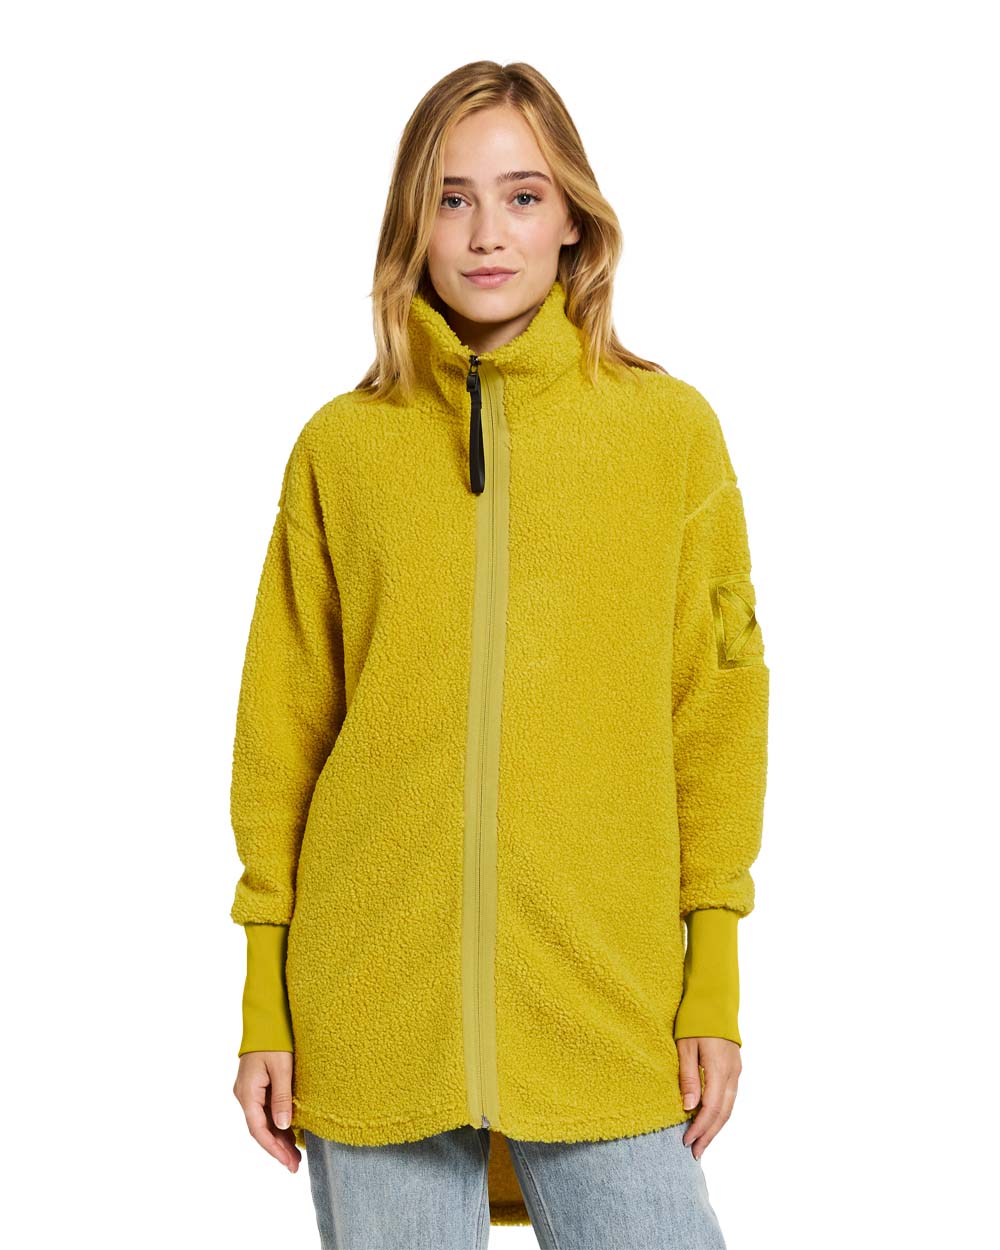 Yellow Bloom coloured Didriksons Full-Zip Jacket on White background 